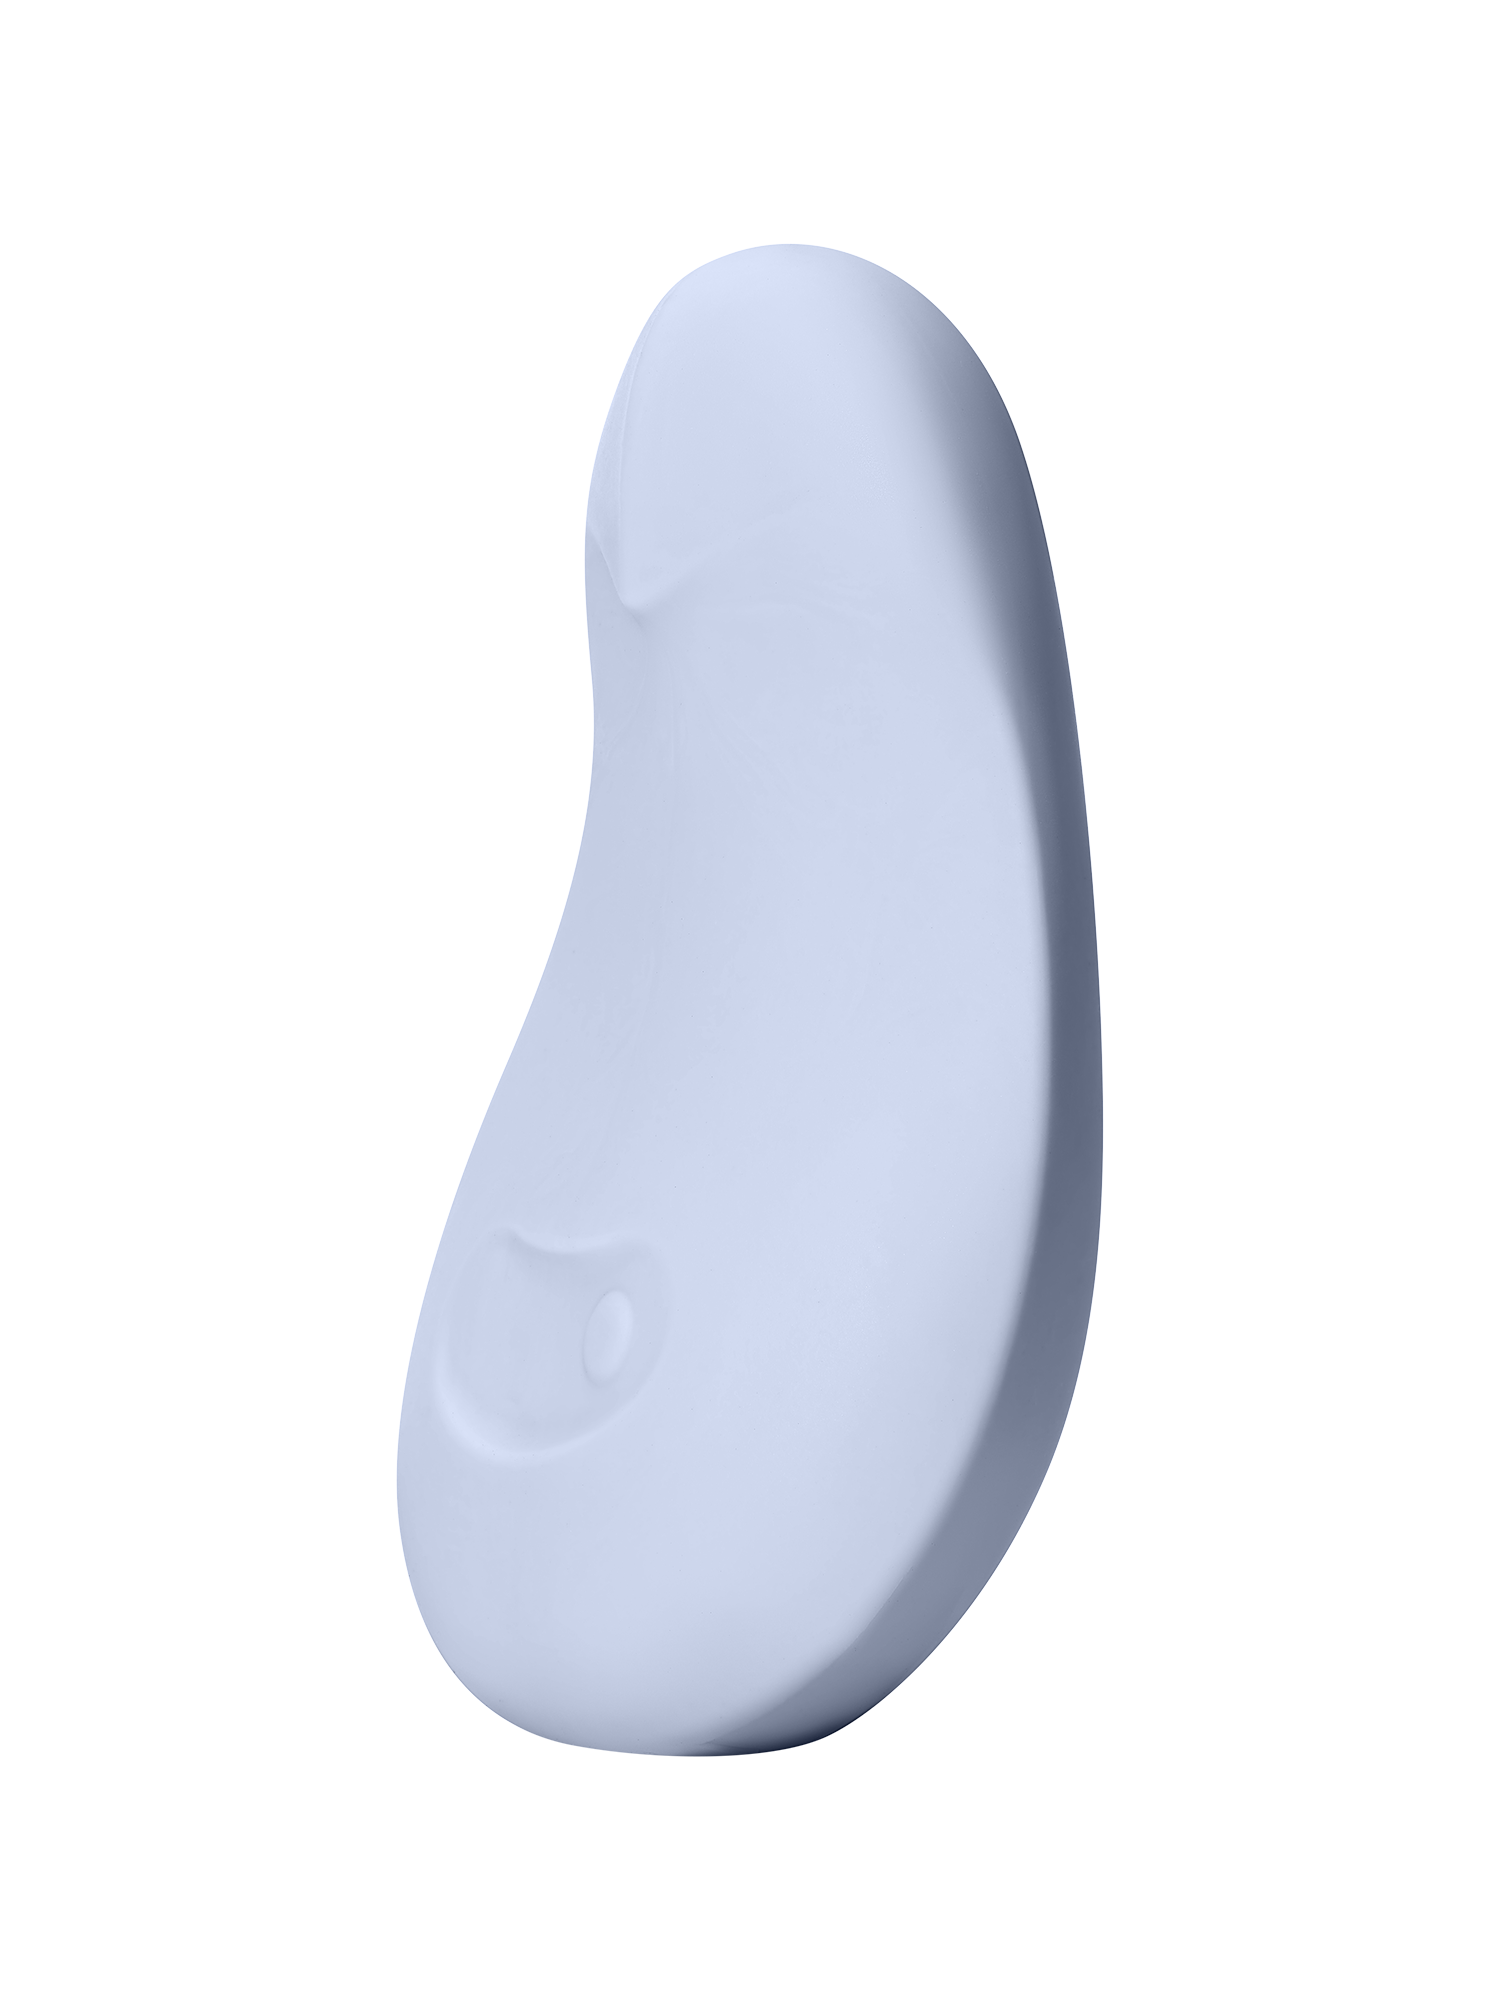 Ice | Seamless | A deep purple, pebble shaped vibrator Pom from the side on off-white background